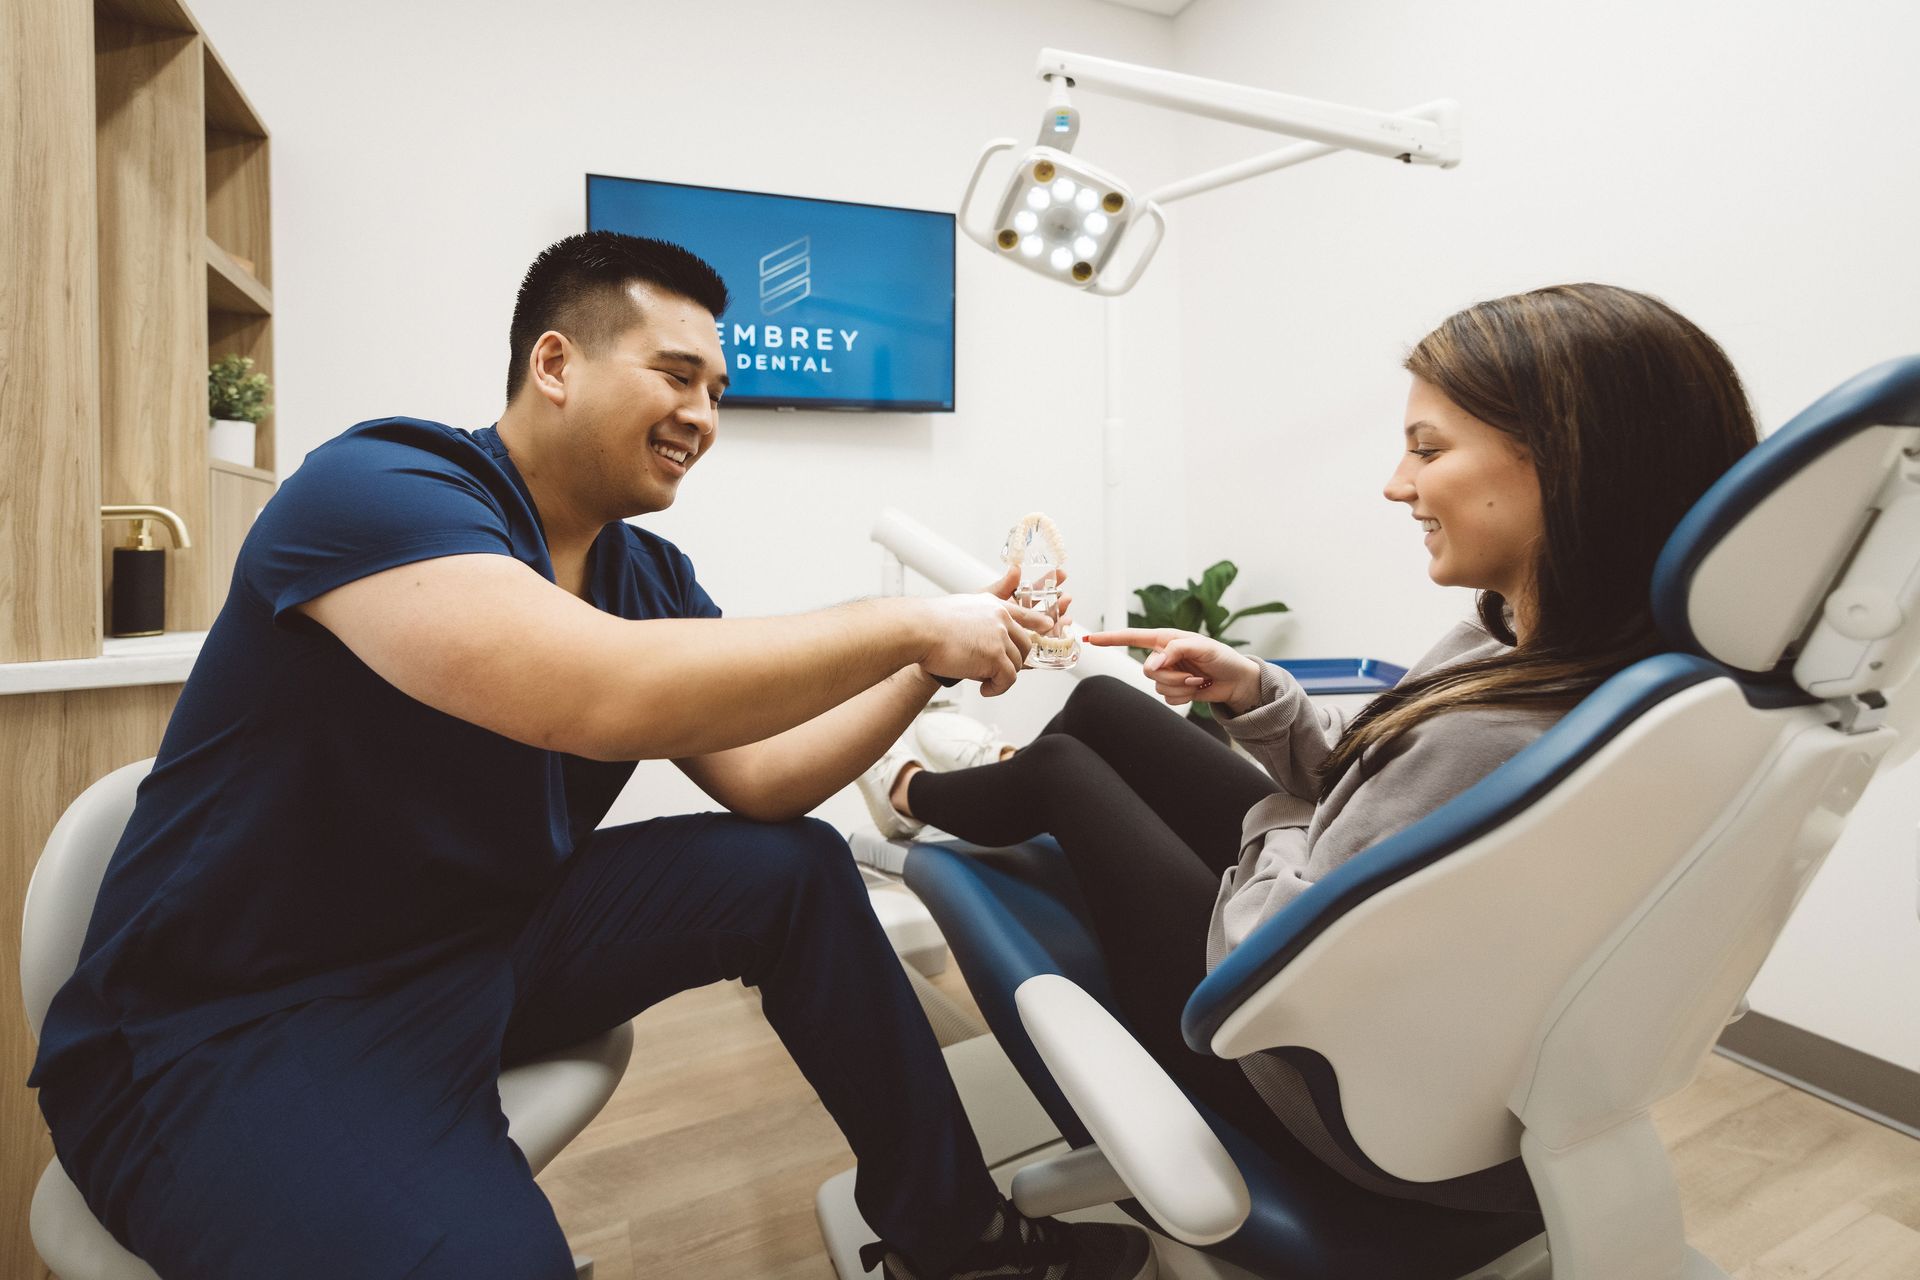 Dr Lim talking with a patient in the dental chair